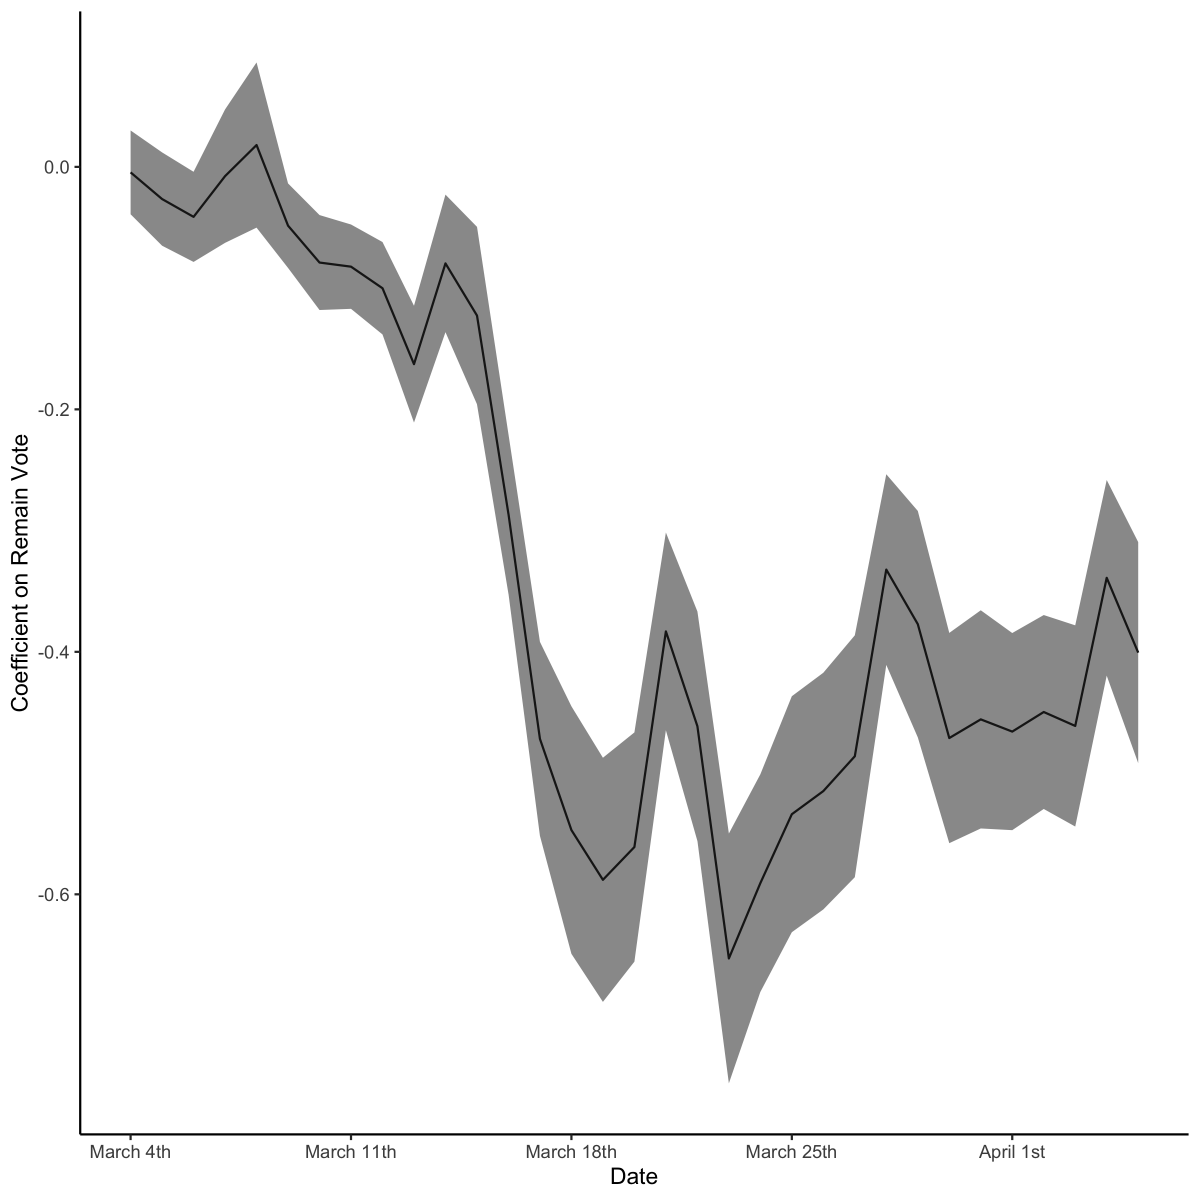 This figure shows how the negative relationship between an area voting Remain and workplace activity strengthened over time. In the first week of March there's barely a relationship and people everywhere hadn't distanced much. But from March 15th to 17th we get a huge drop 14/n